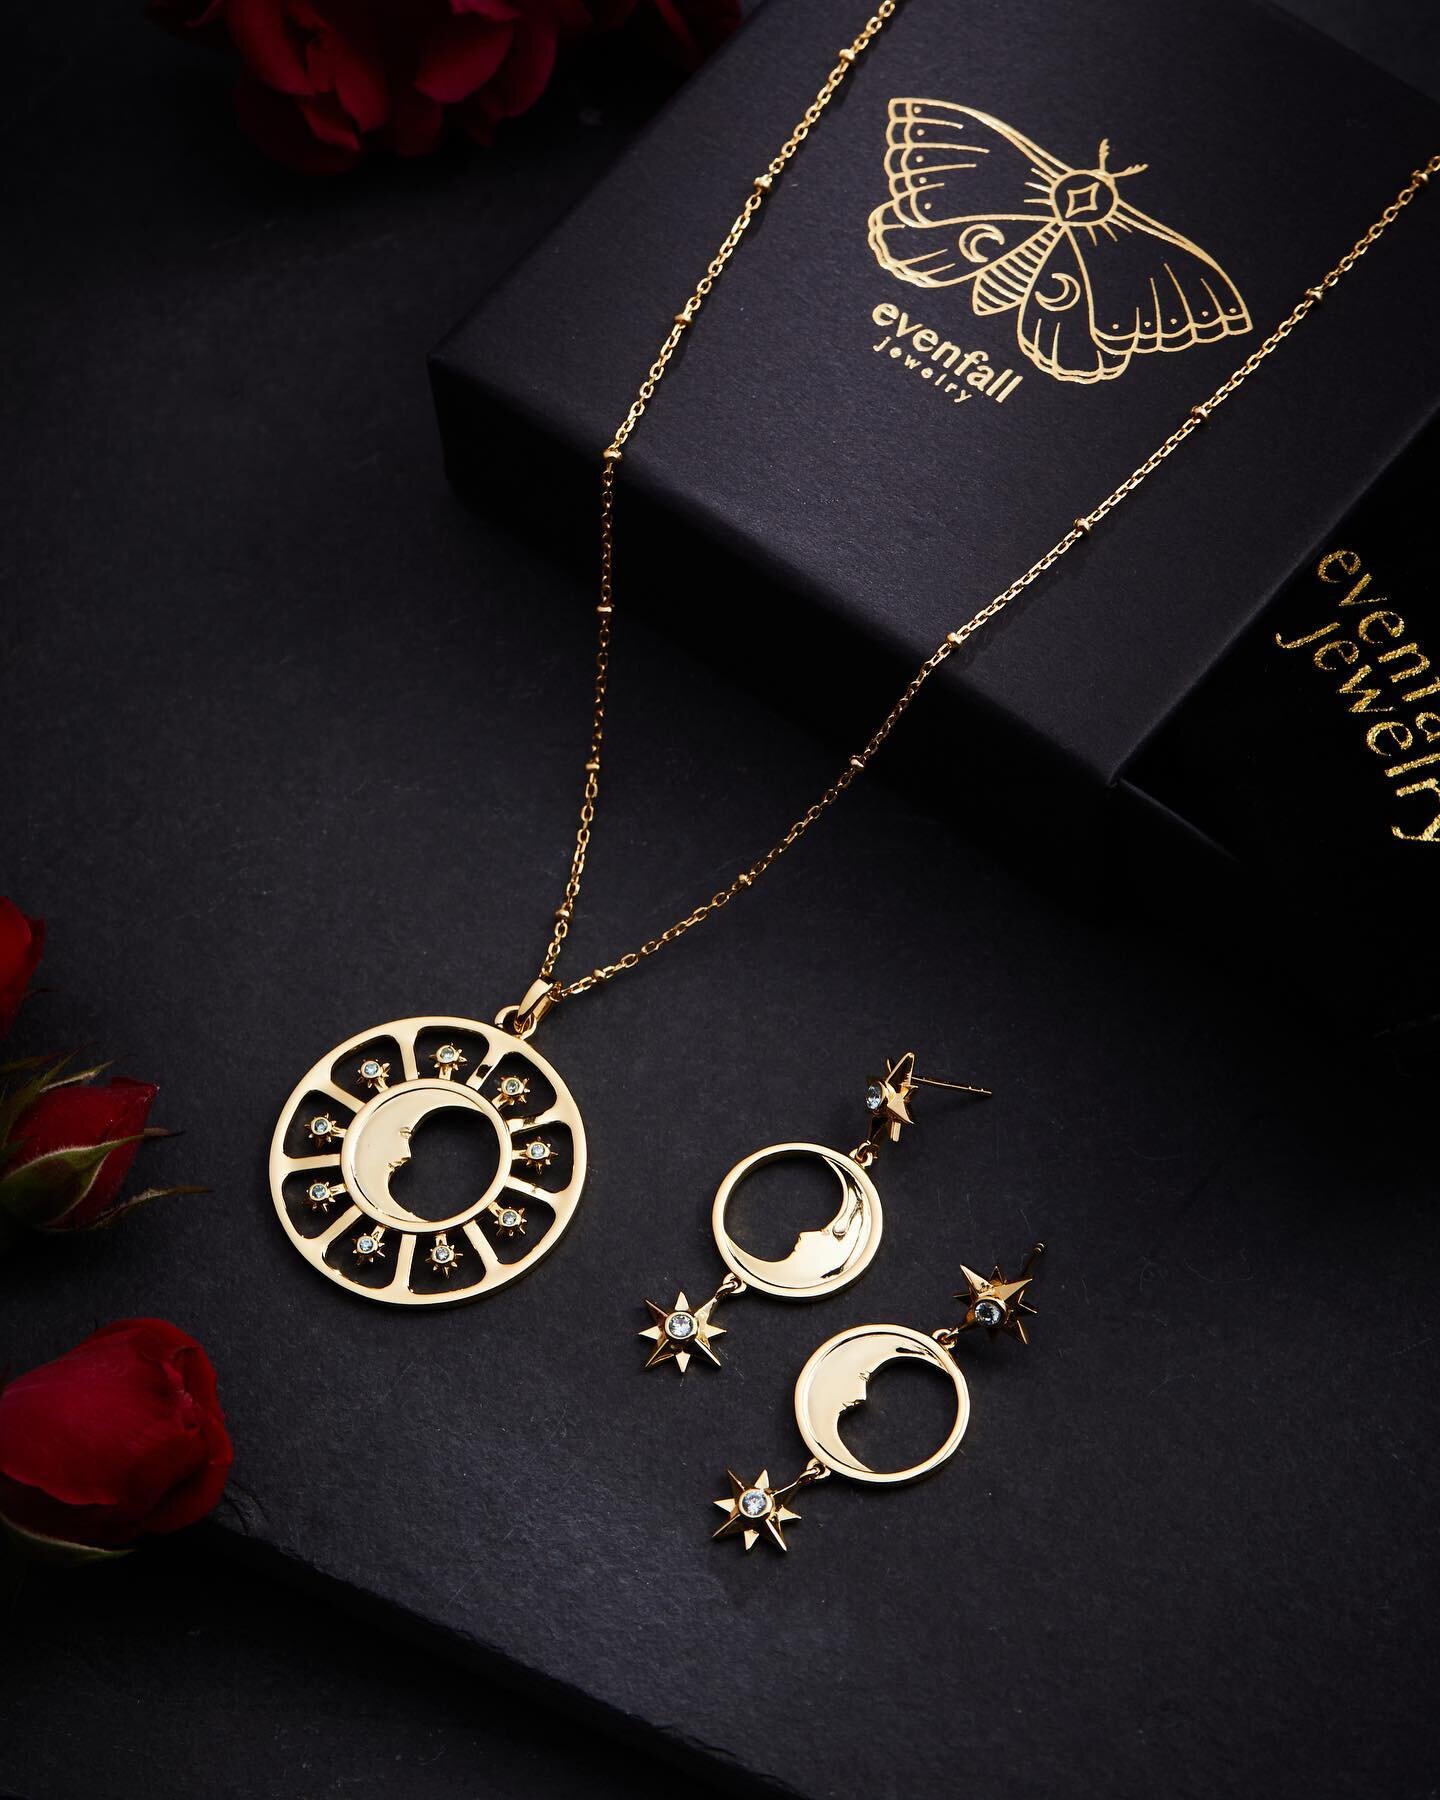 Harness the magic of the moon with the Luna pendant + Luna drop earrings - a perfect match 🌜🤍
.
.
.

#jewelry #jewelrydesigner #jewelrybusiness #925silver #925sterlingsilver #goldjewelry #witchyvibes #bohostyle #celestial #celestialjewelry #jewelry